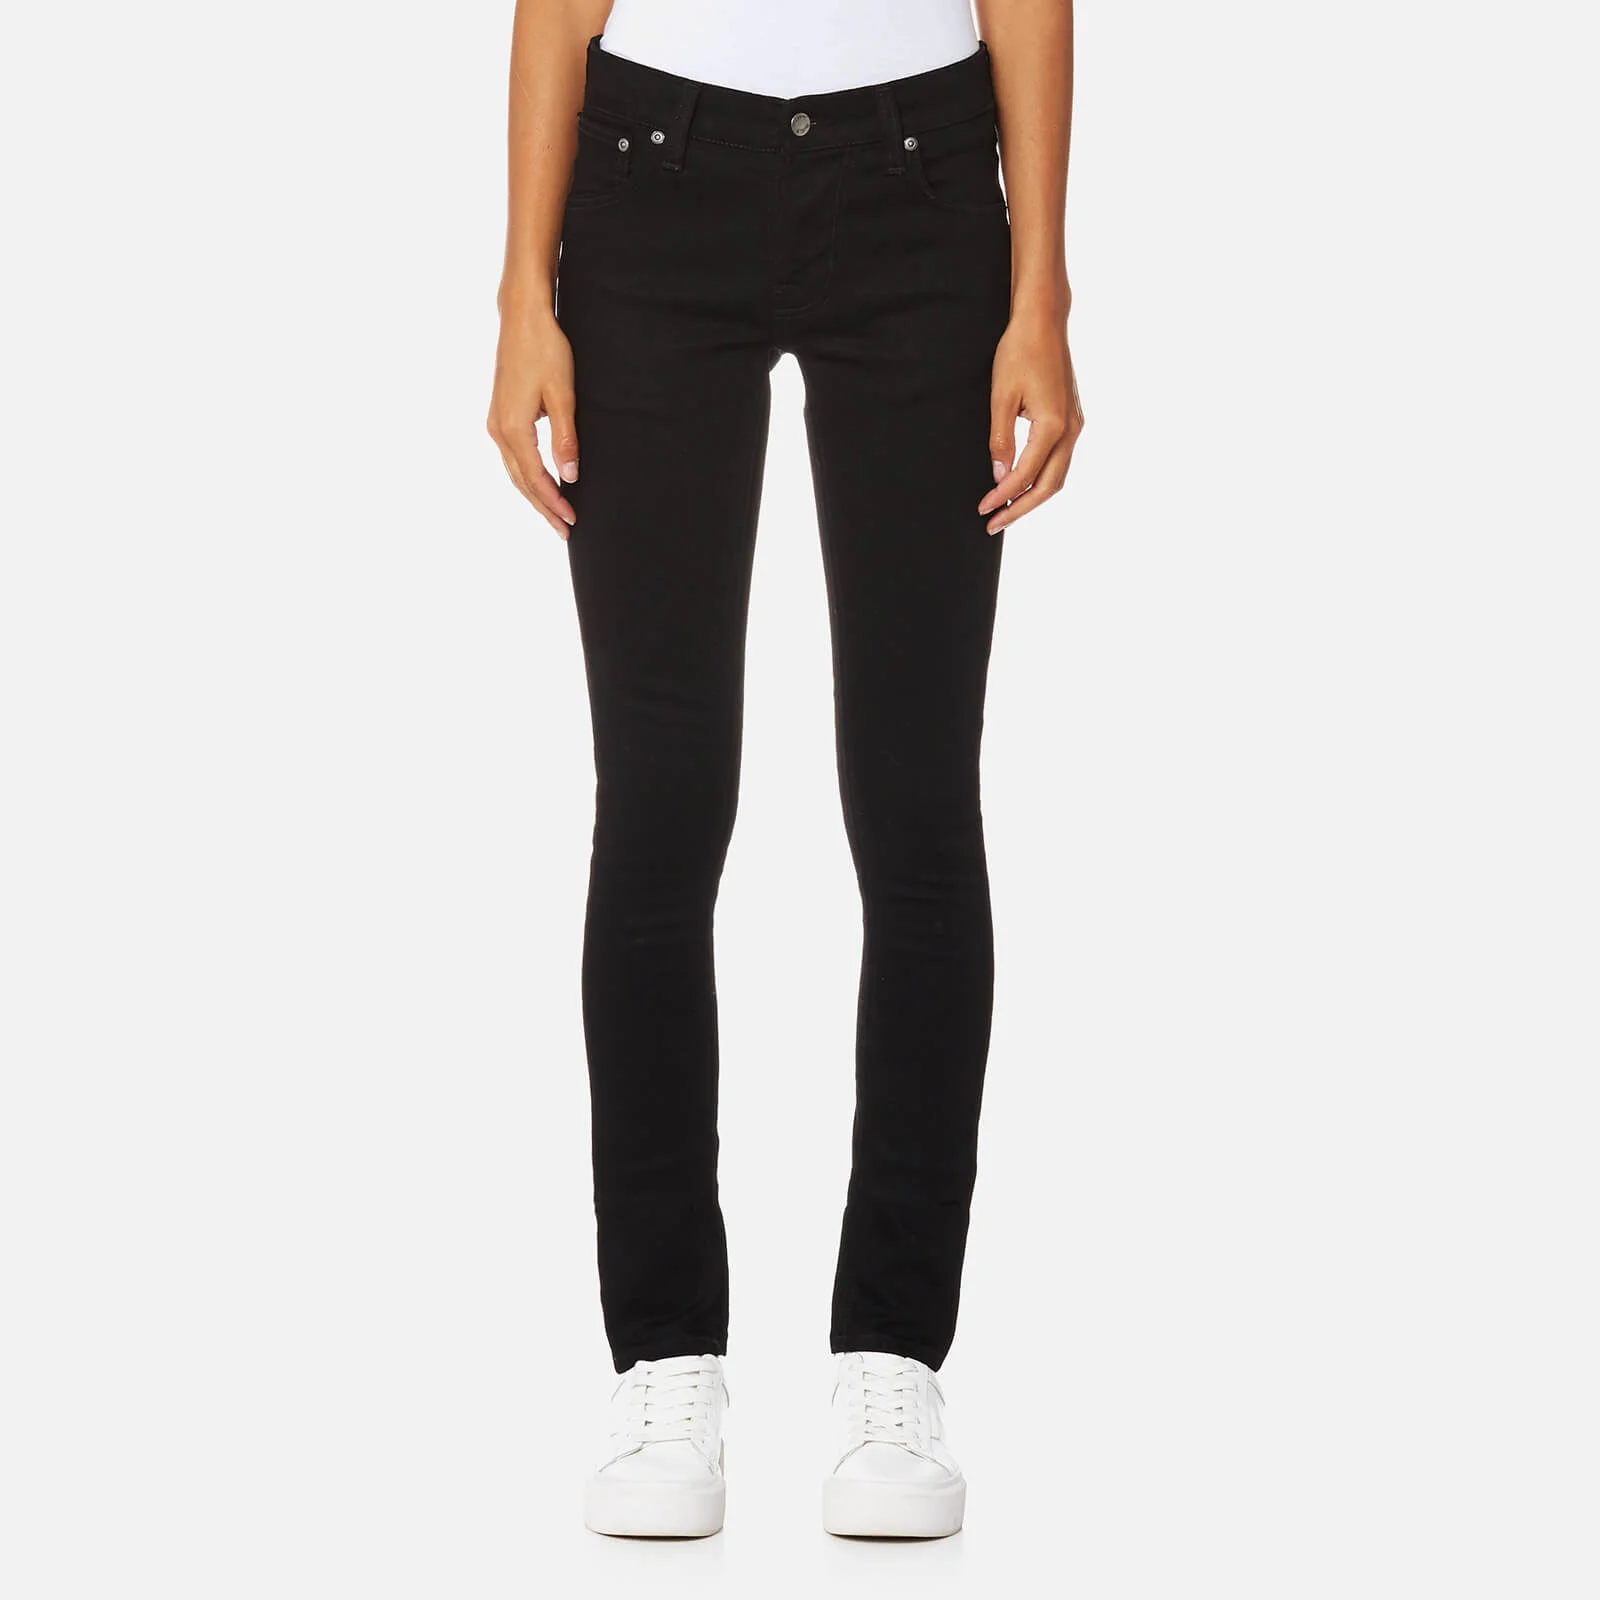 Nudie Jeans Women's Tight Terry Jeans - Deep Black Image 1